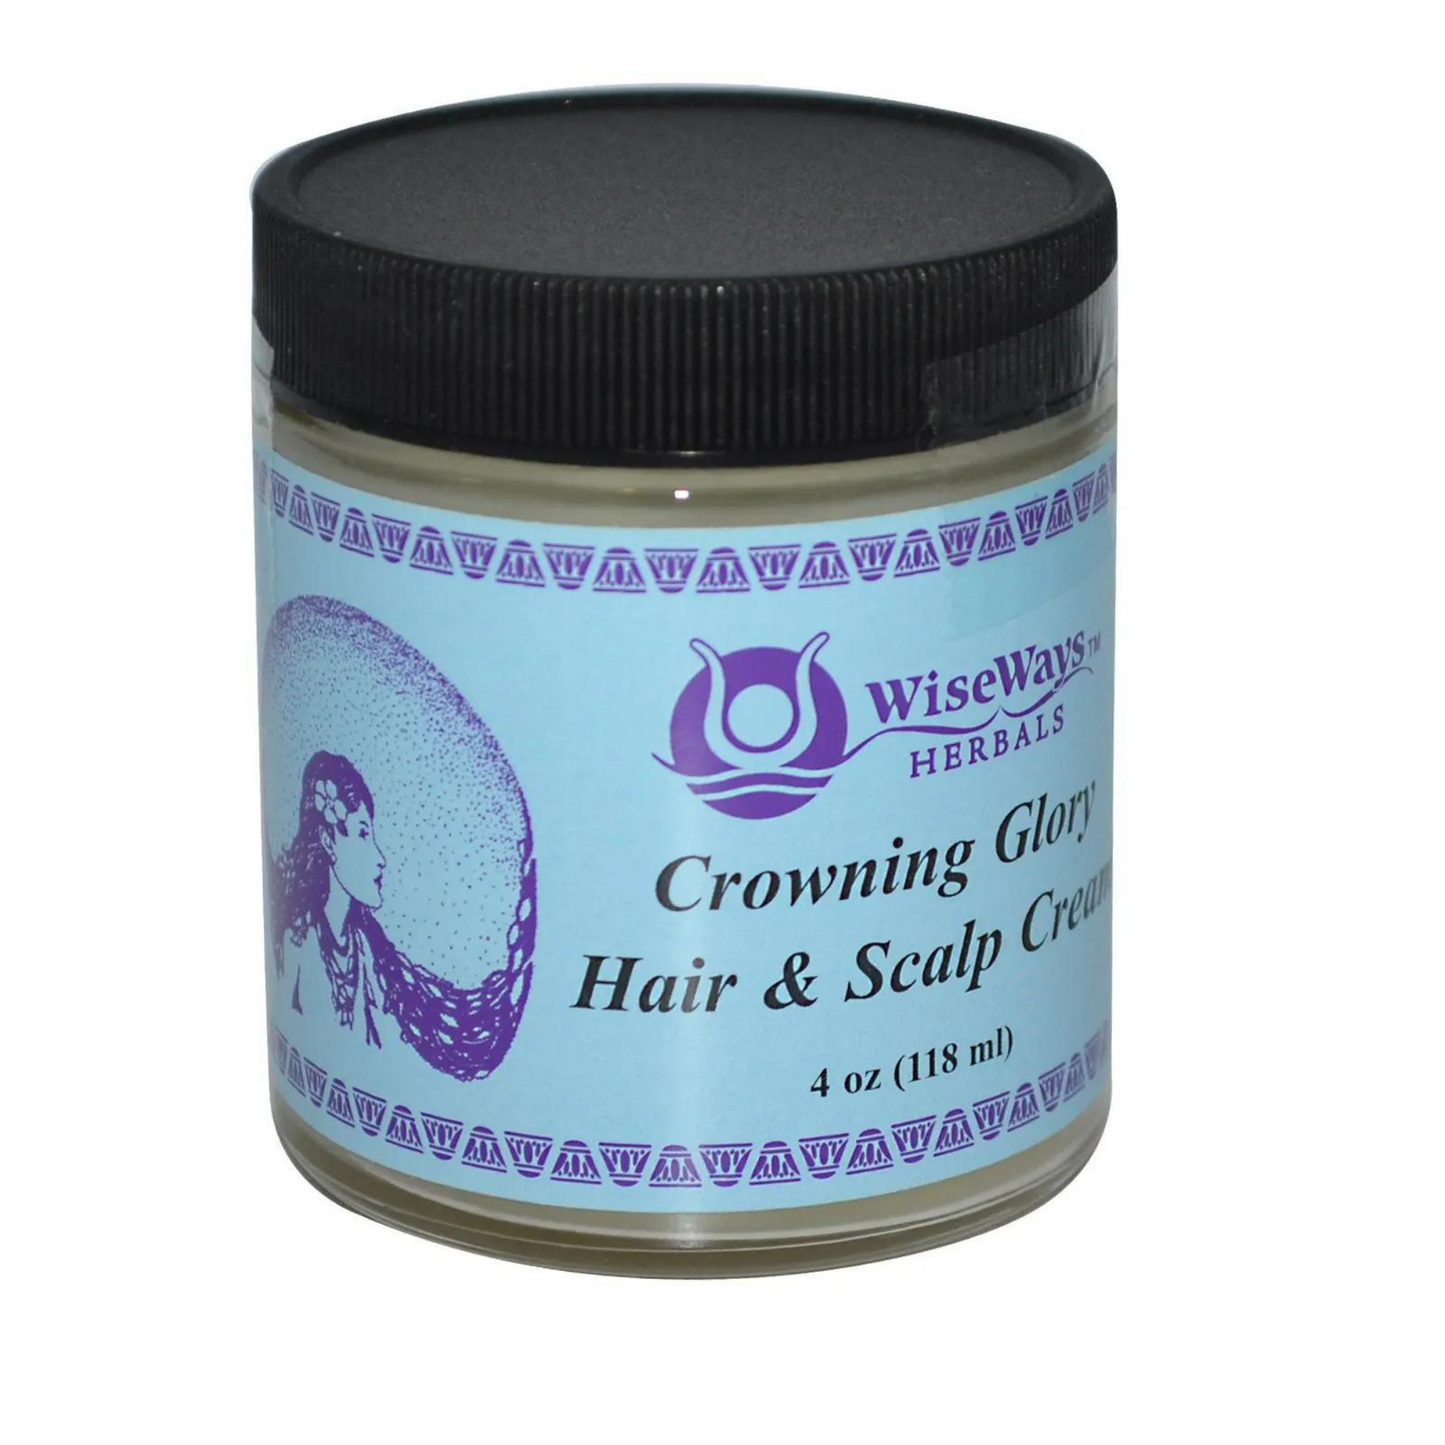 Primary Image of Crowning Glory Hair & Scalp Cream